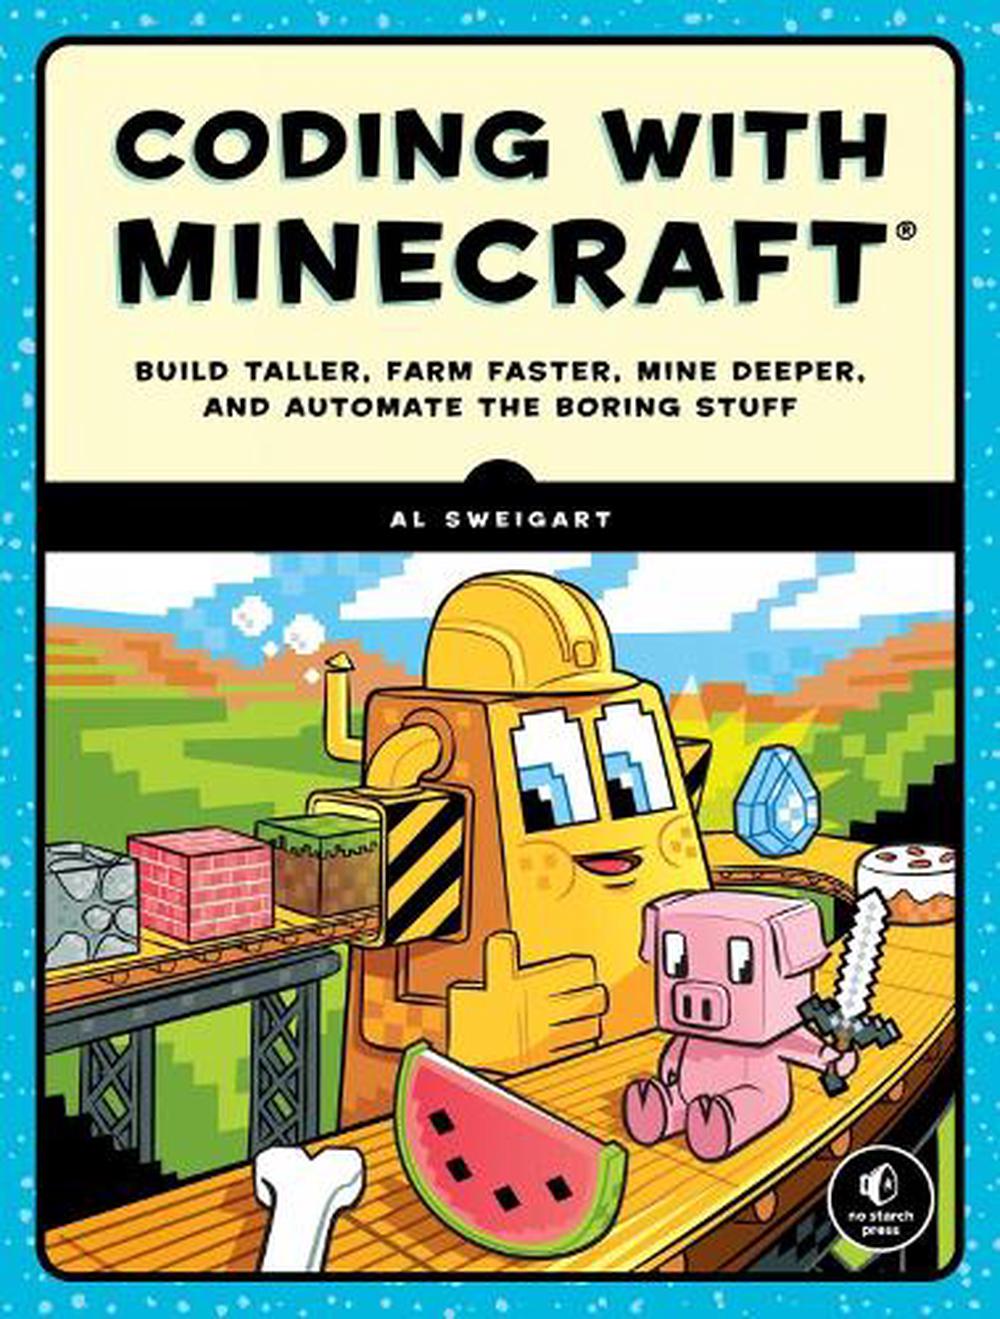 Coding With Minecraft by Al Sweigart, Paperback, 9781593278533 Buy